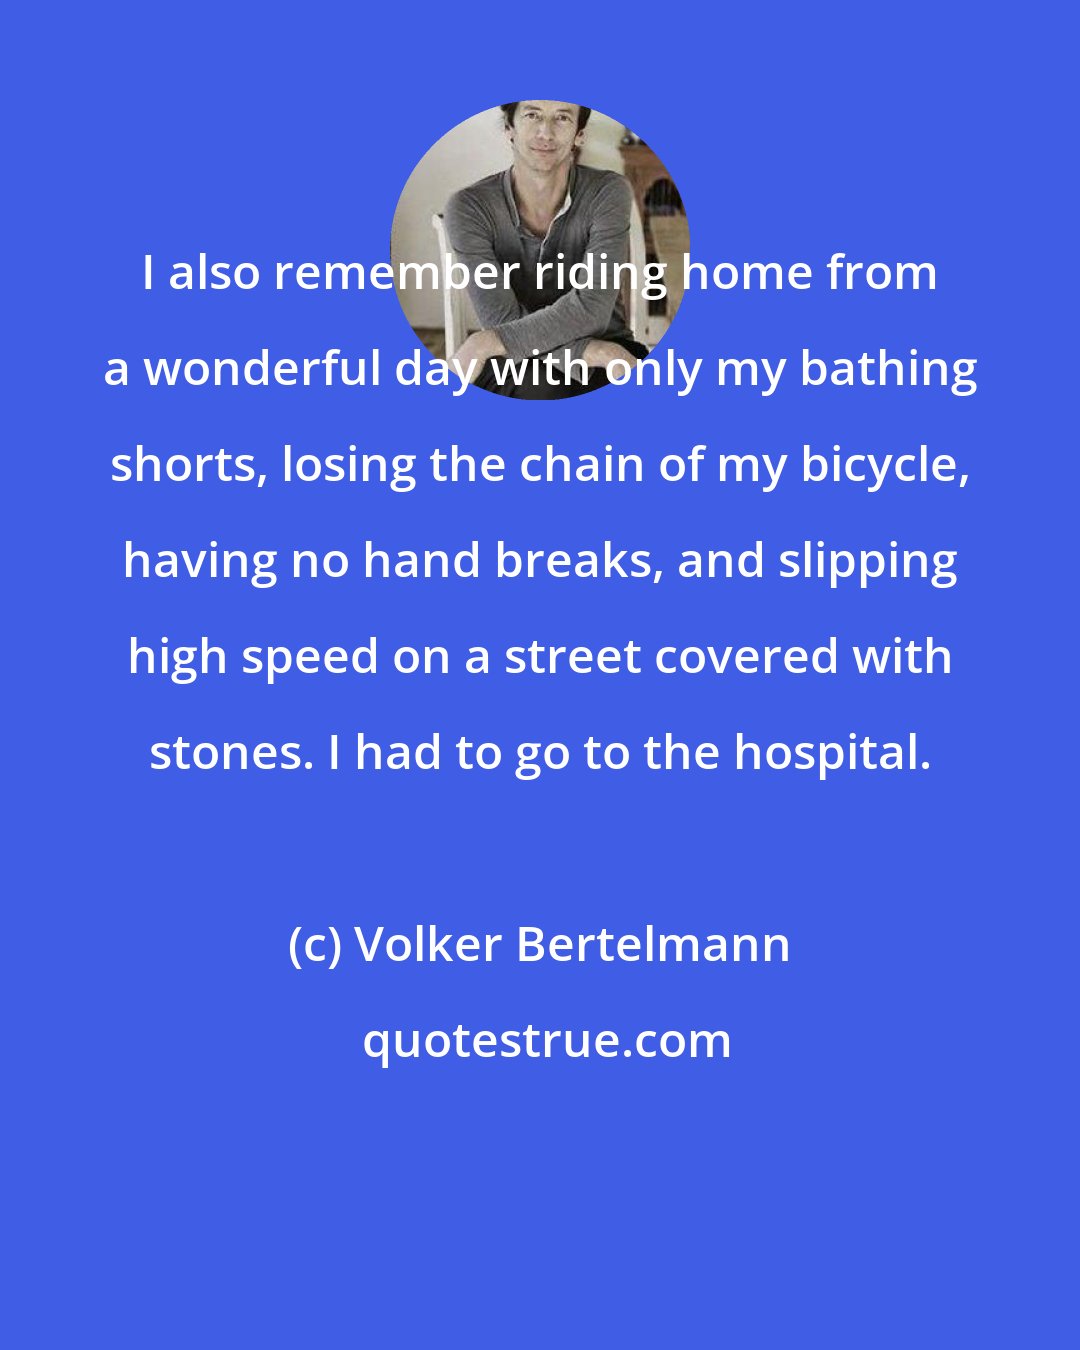 Volker Bertelmann: I also remember riding home from a wonderful day with only my bathing shorts, losing the chain of my bicycle, having no hand breaks, and slipping high speed on a street covered with stones. I had to go to the hospital.